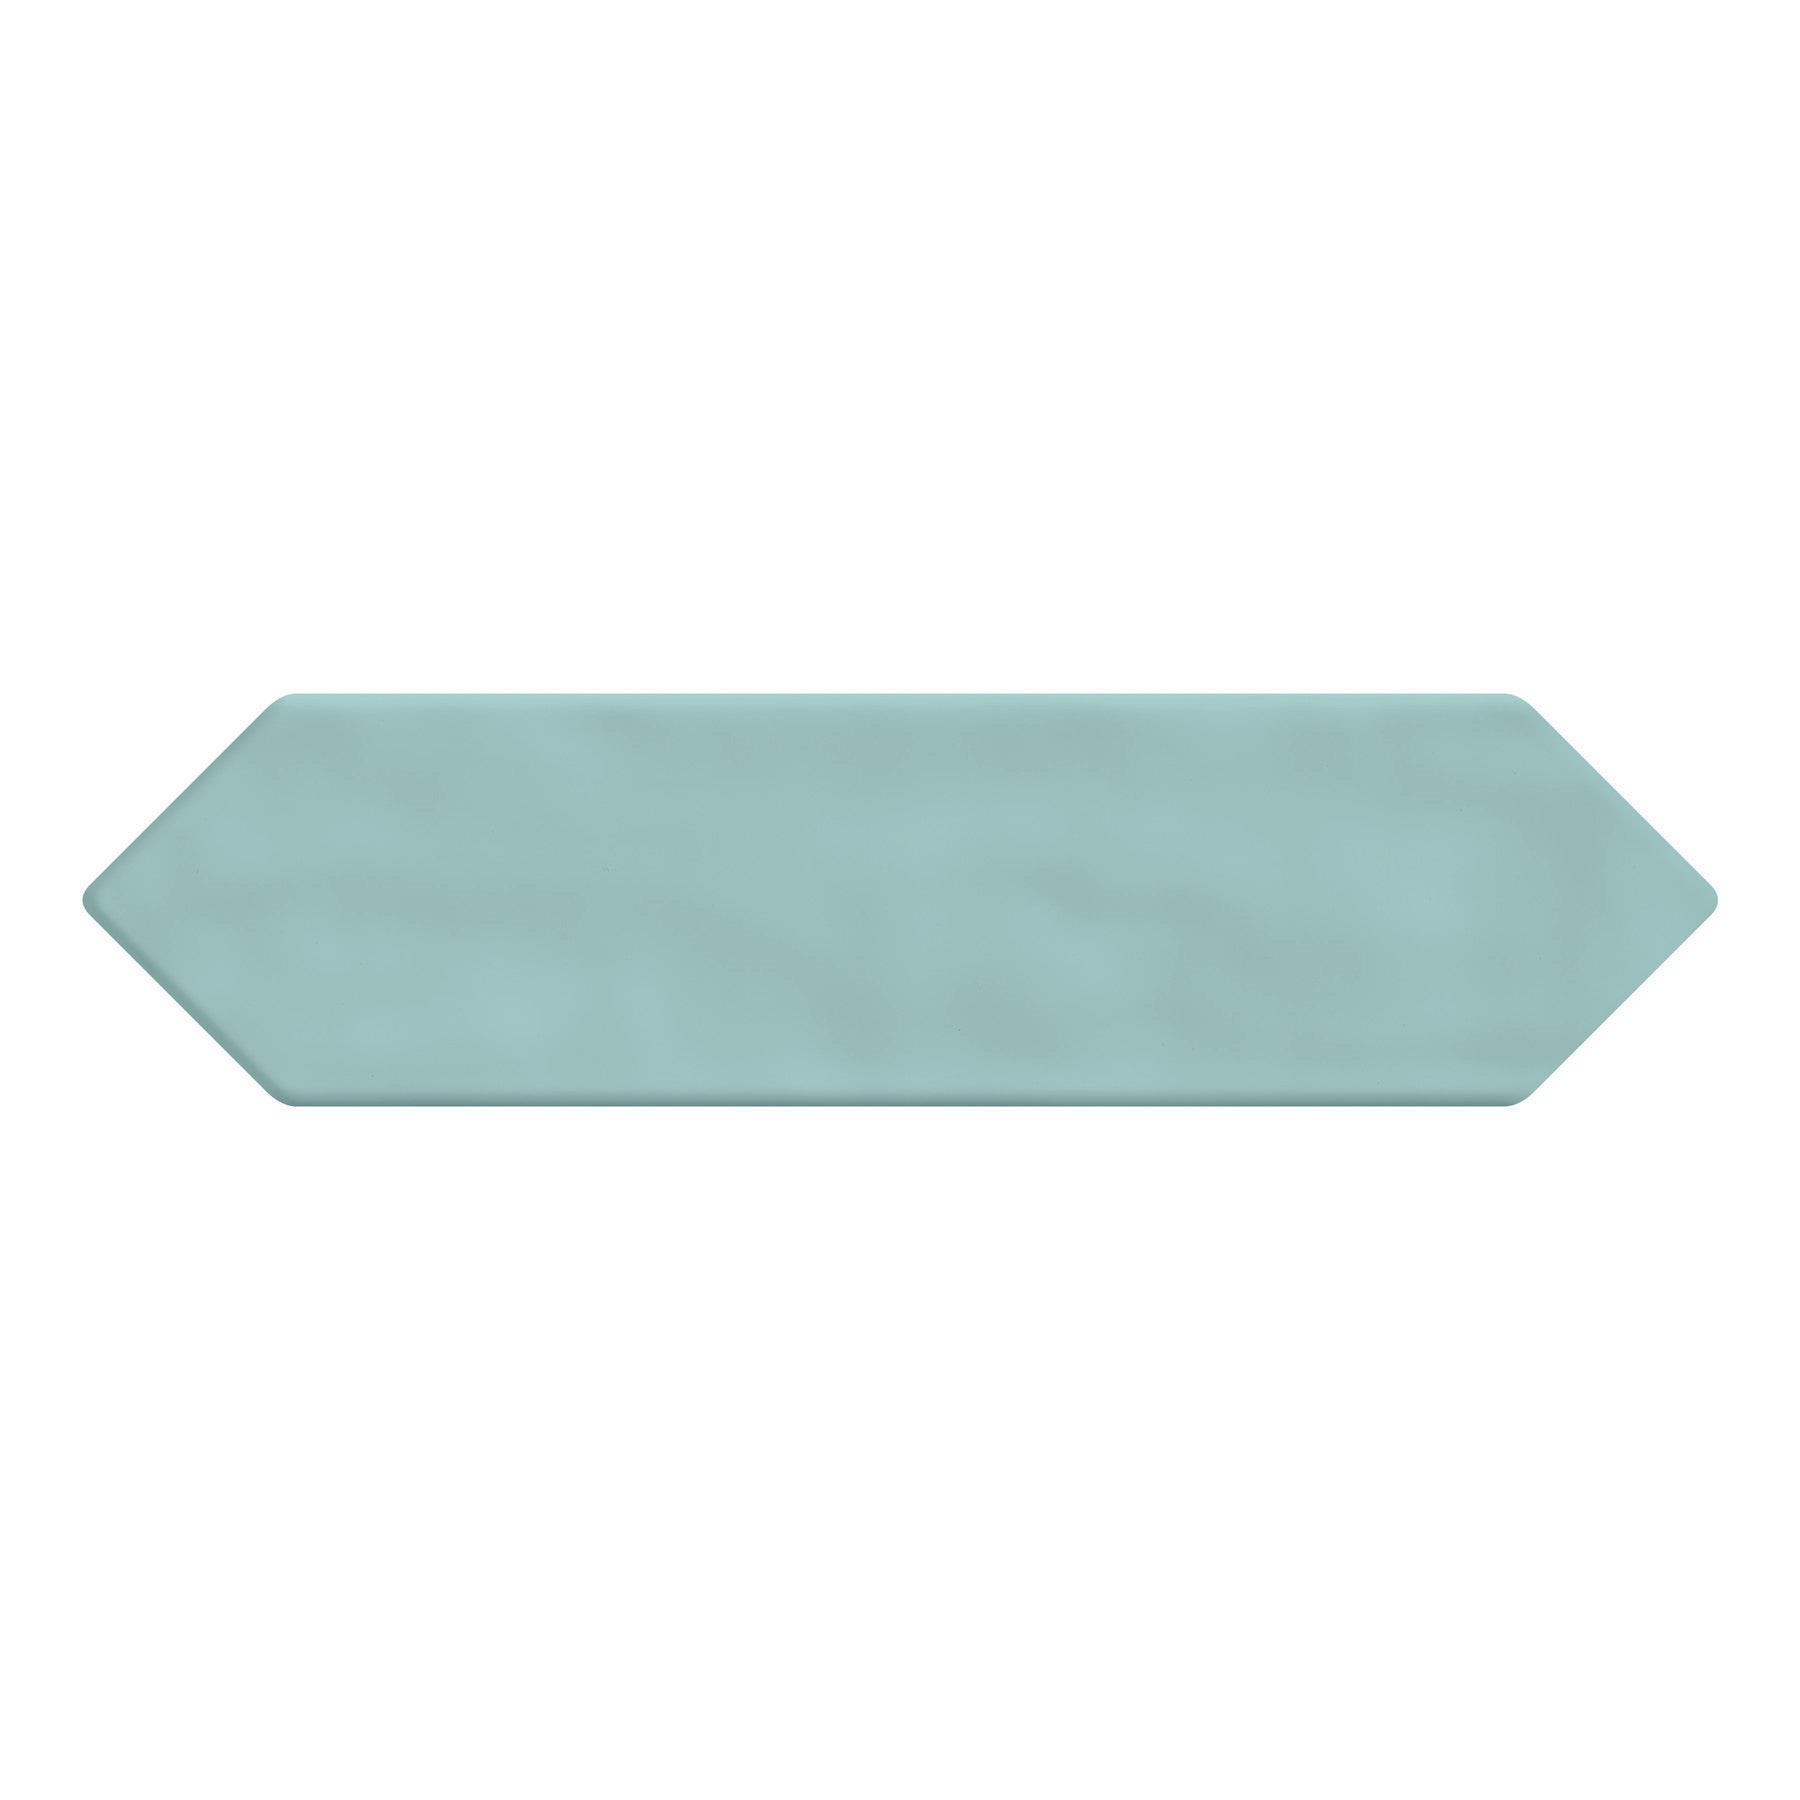 Daltile - Stagecraft - 3 in. x 12 in. Picket Wall Tile - Matte Spa 0748